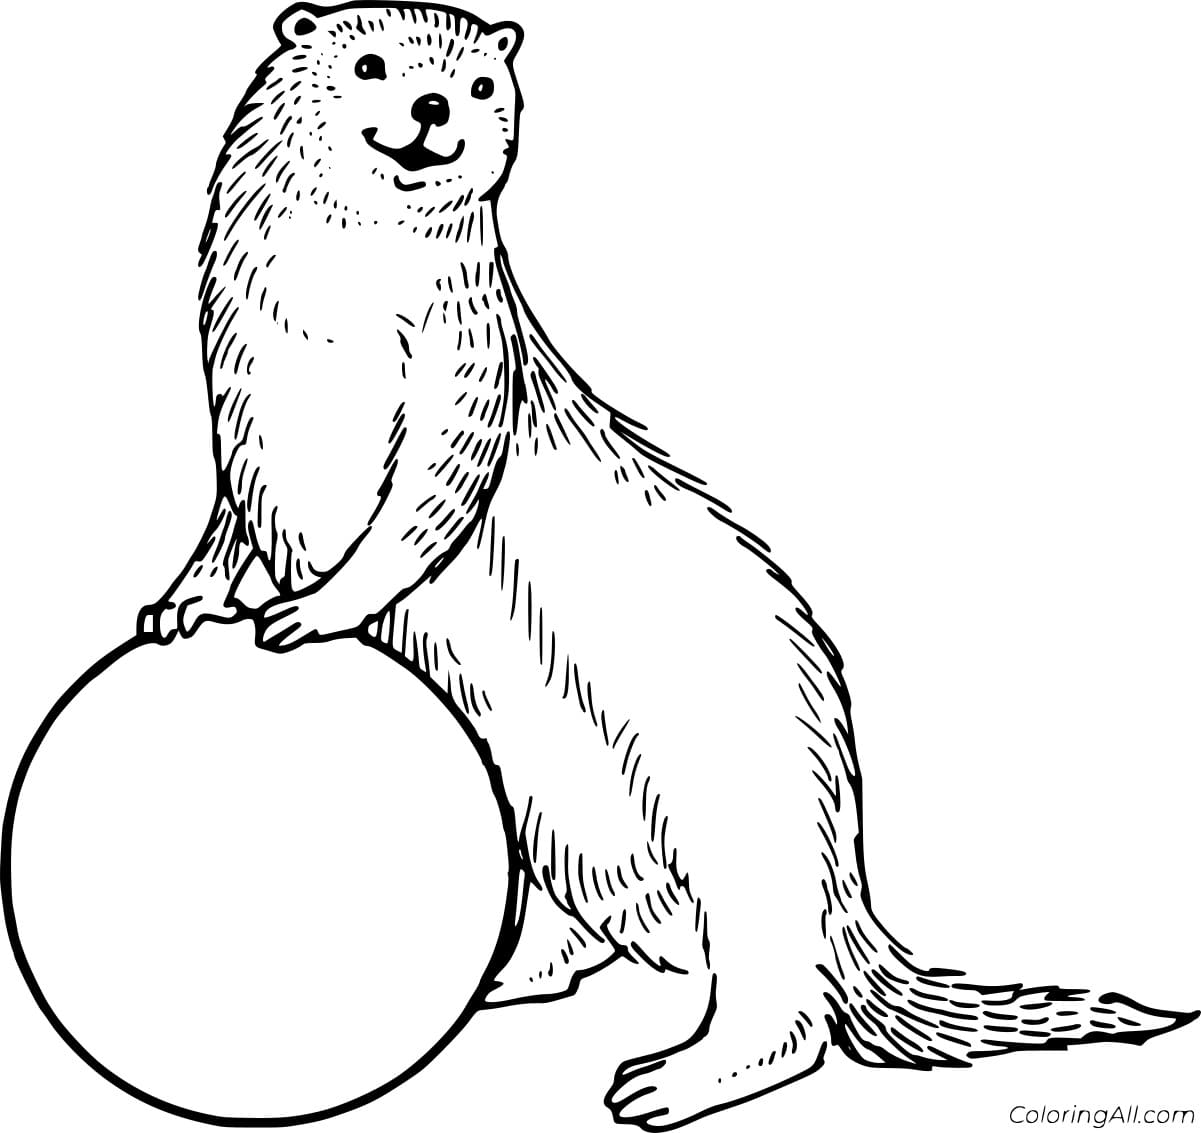 Realistic Otter Playing a Ball Free Printable